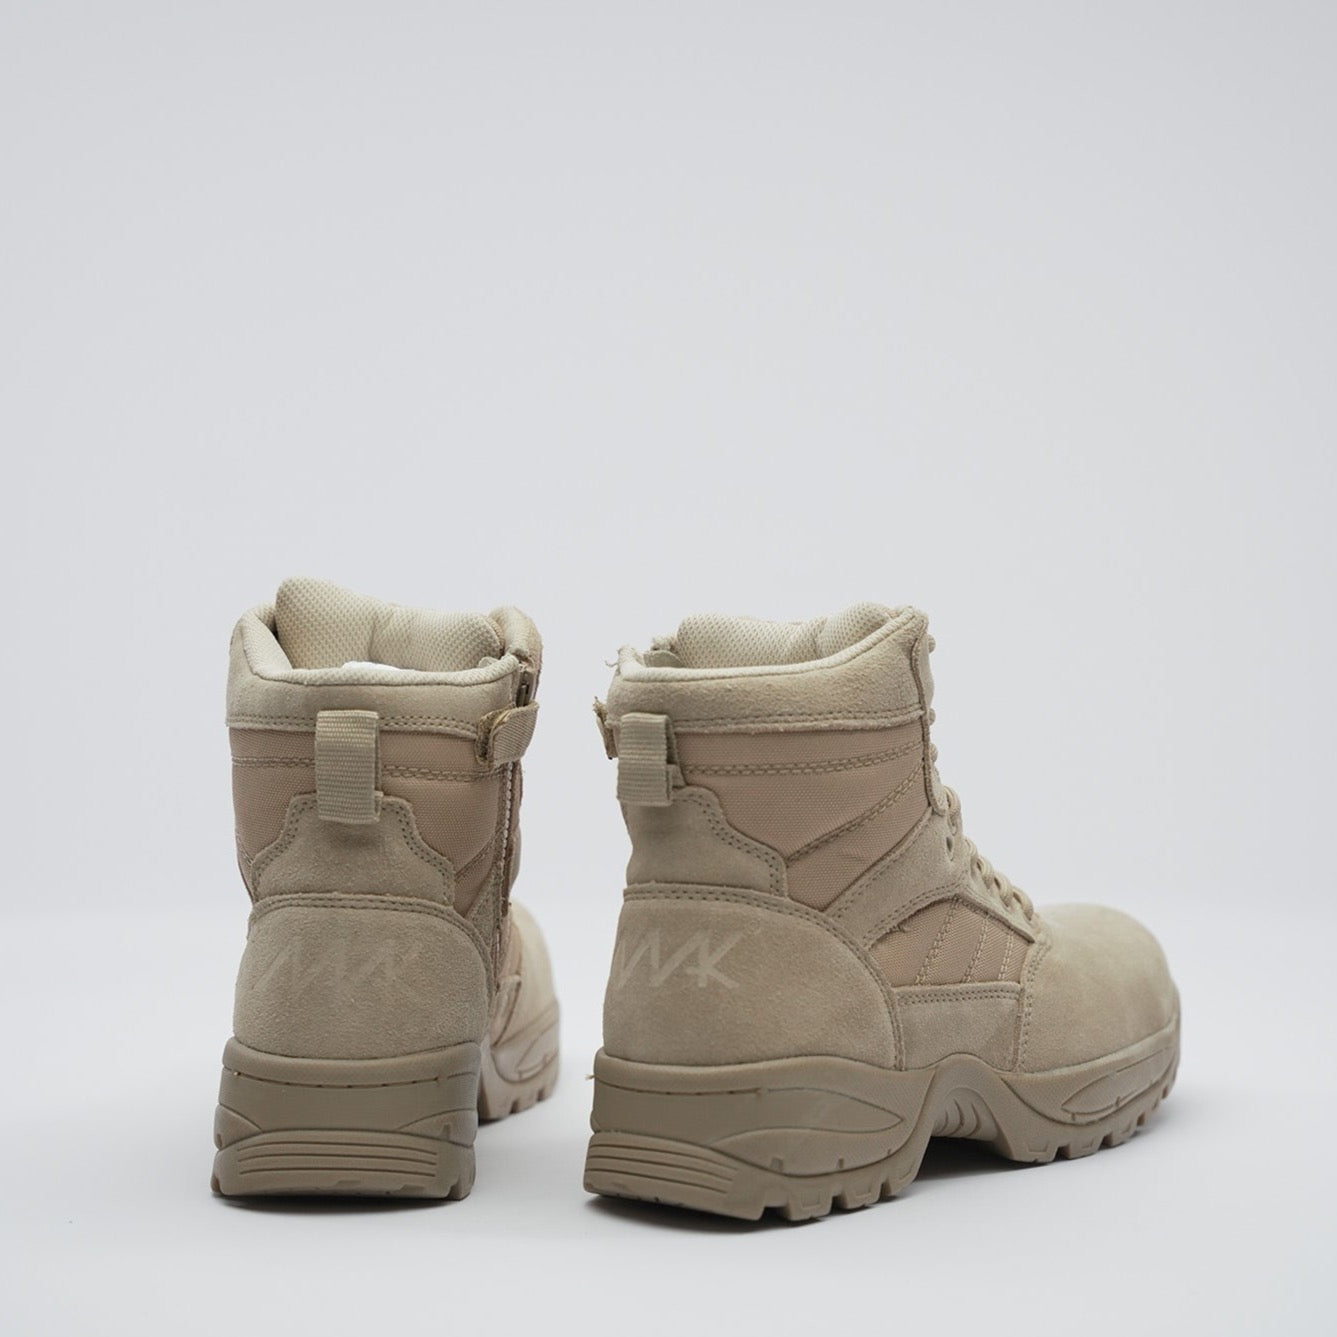 rear view of military boots desert tan with mak logo on heel